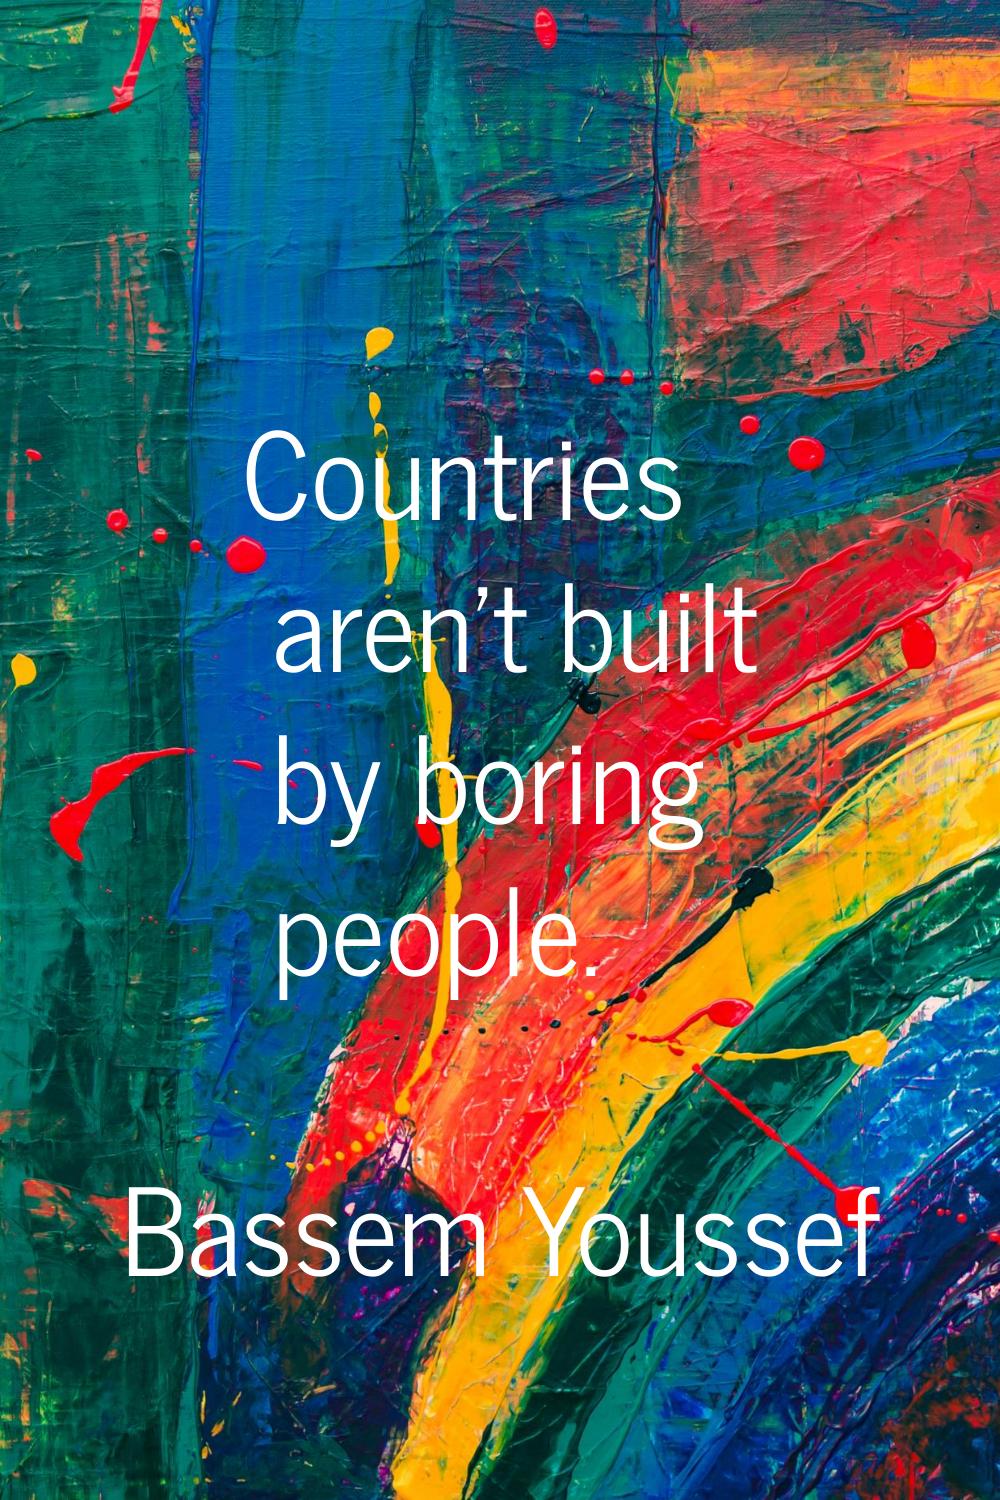 Countries aren't built by boring people.